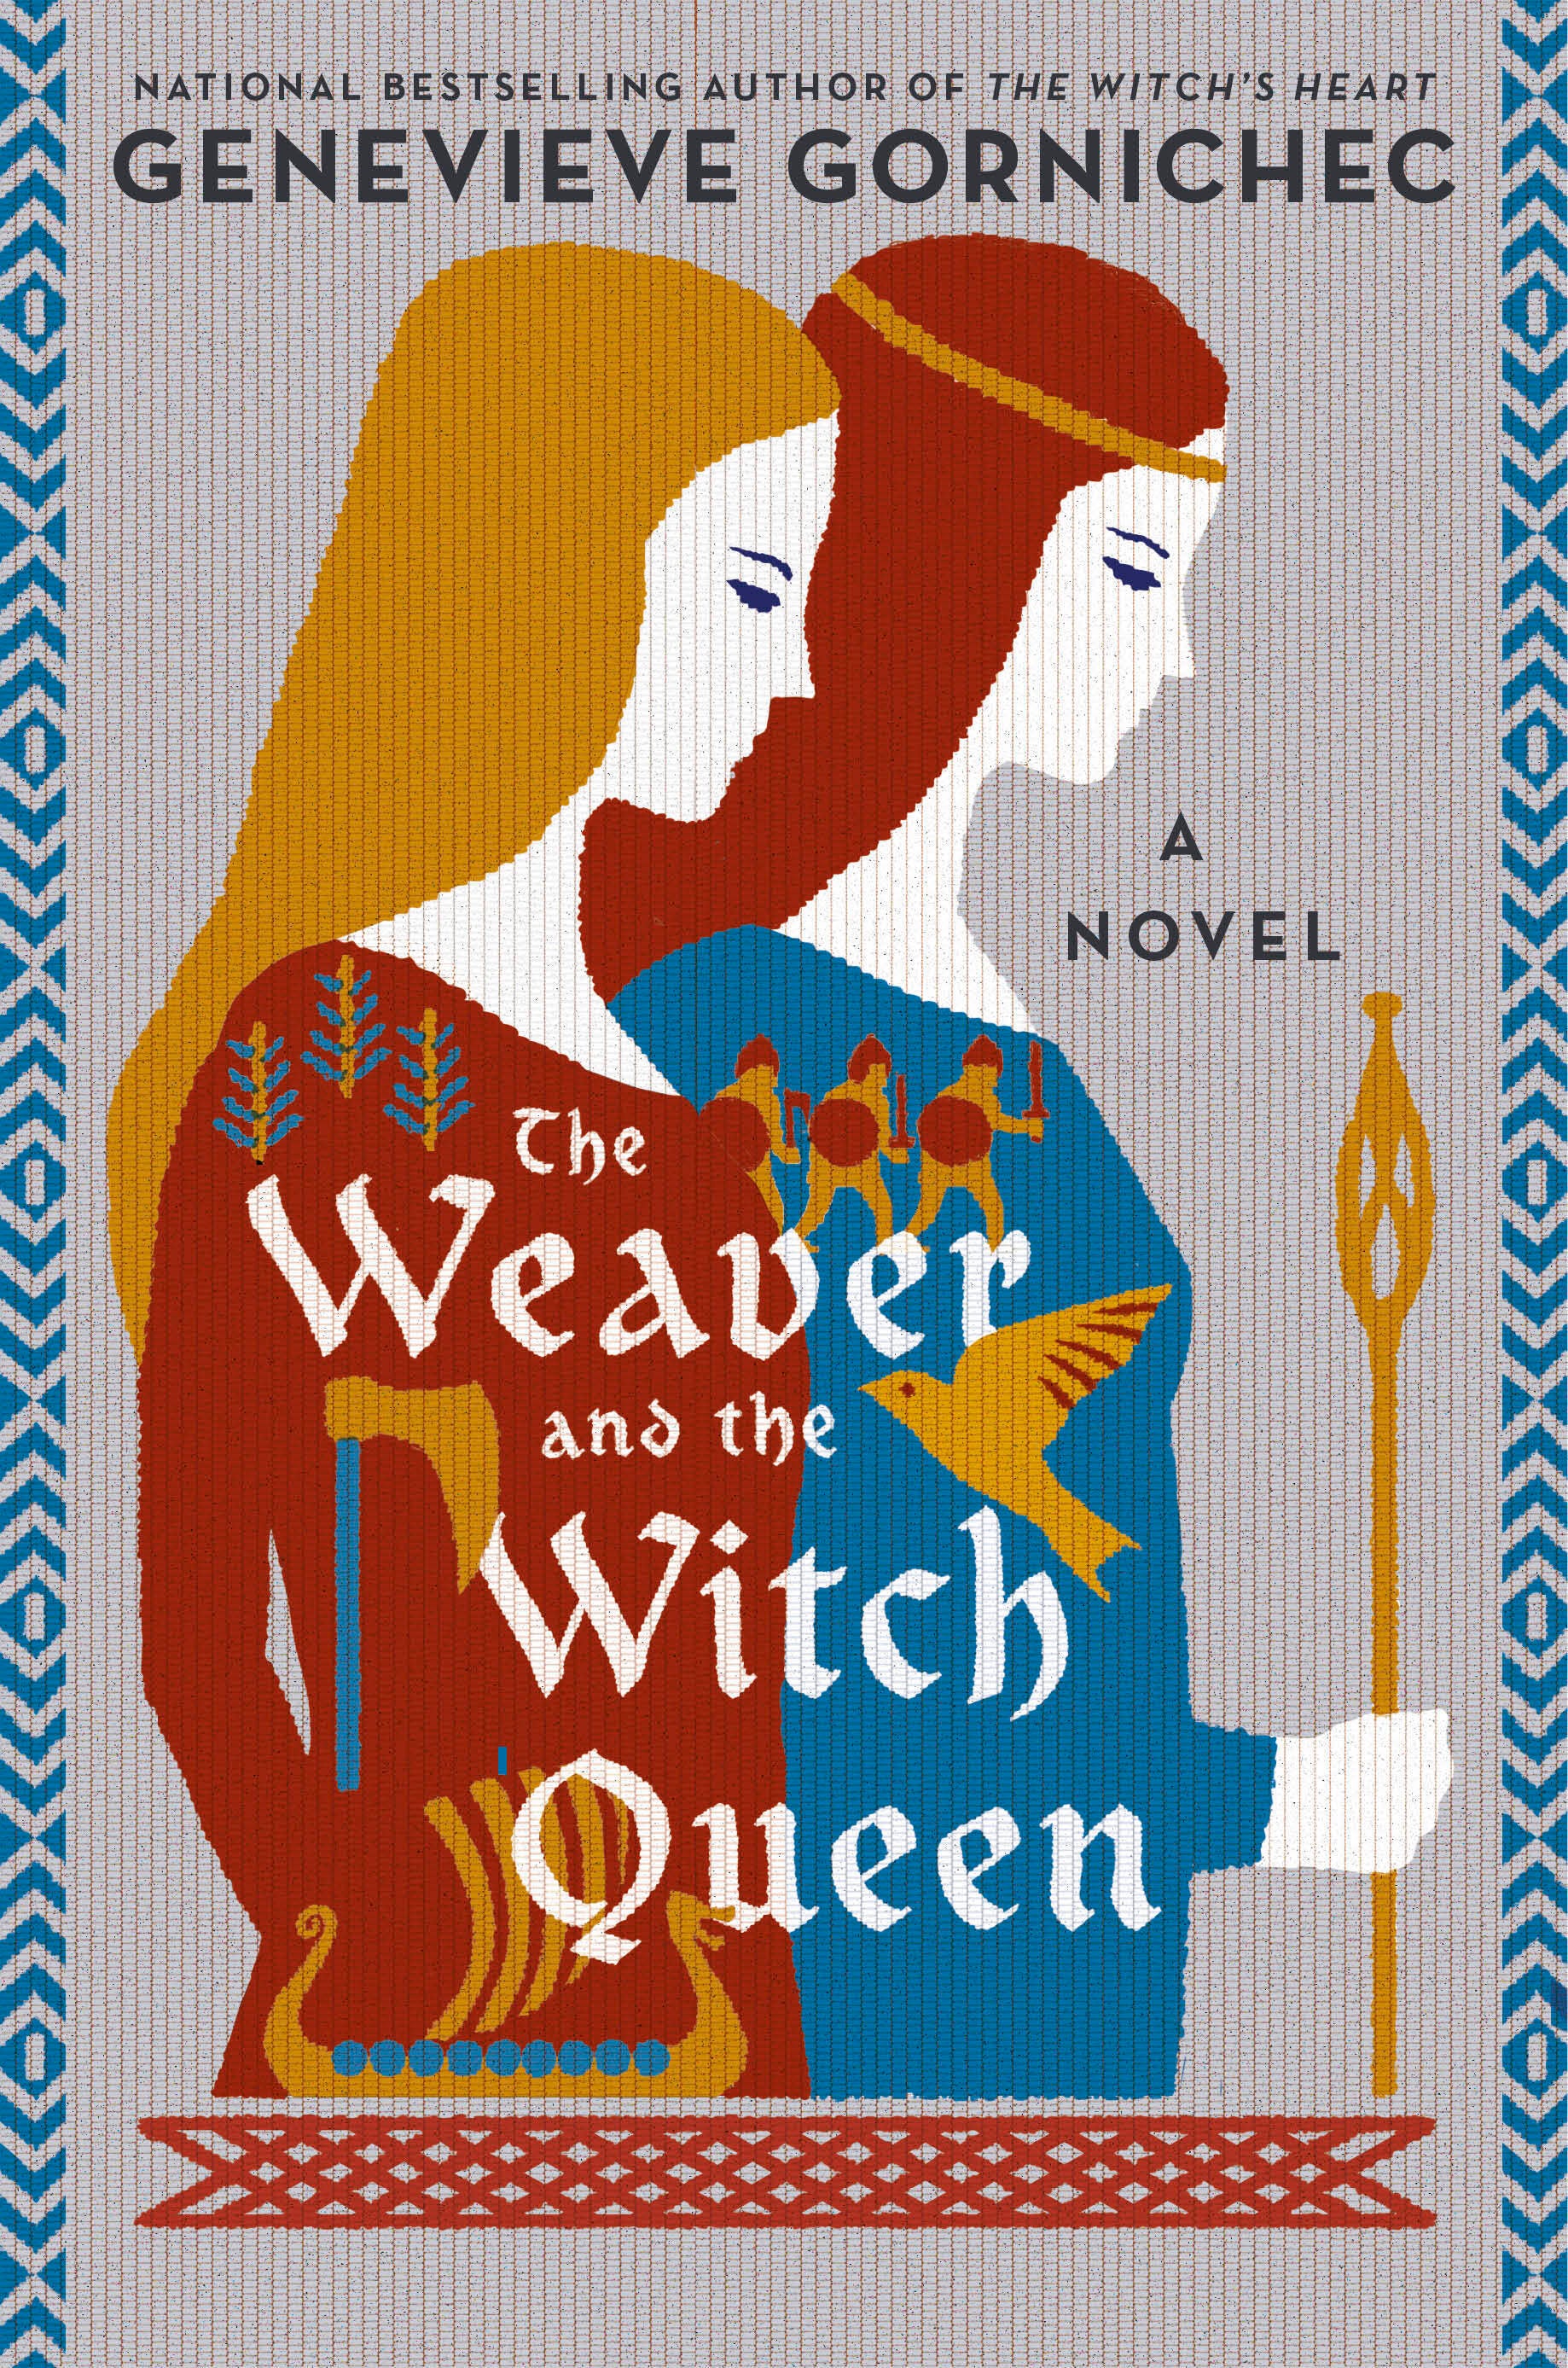 Book Review - The Weaver and the Witch Queen